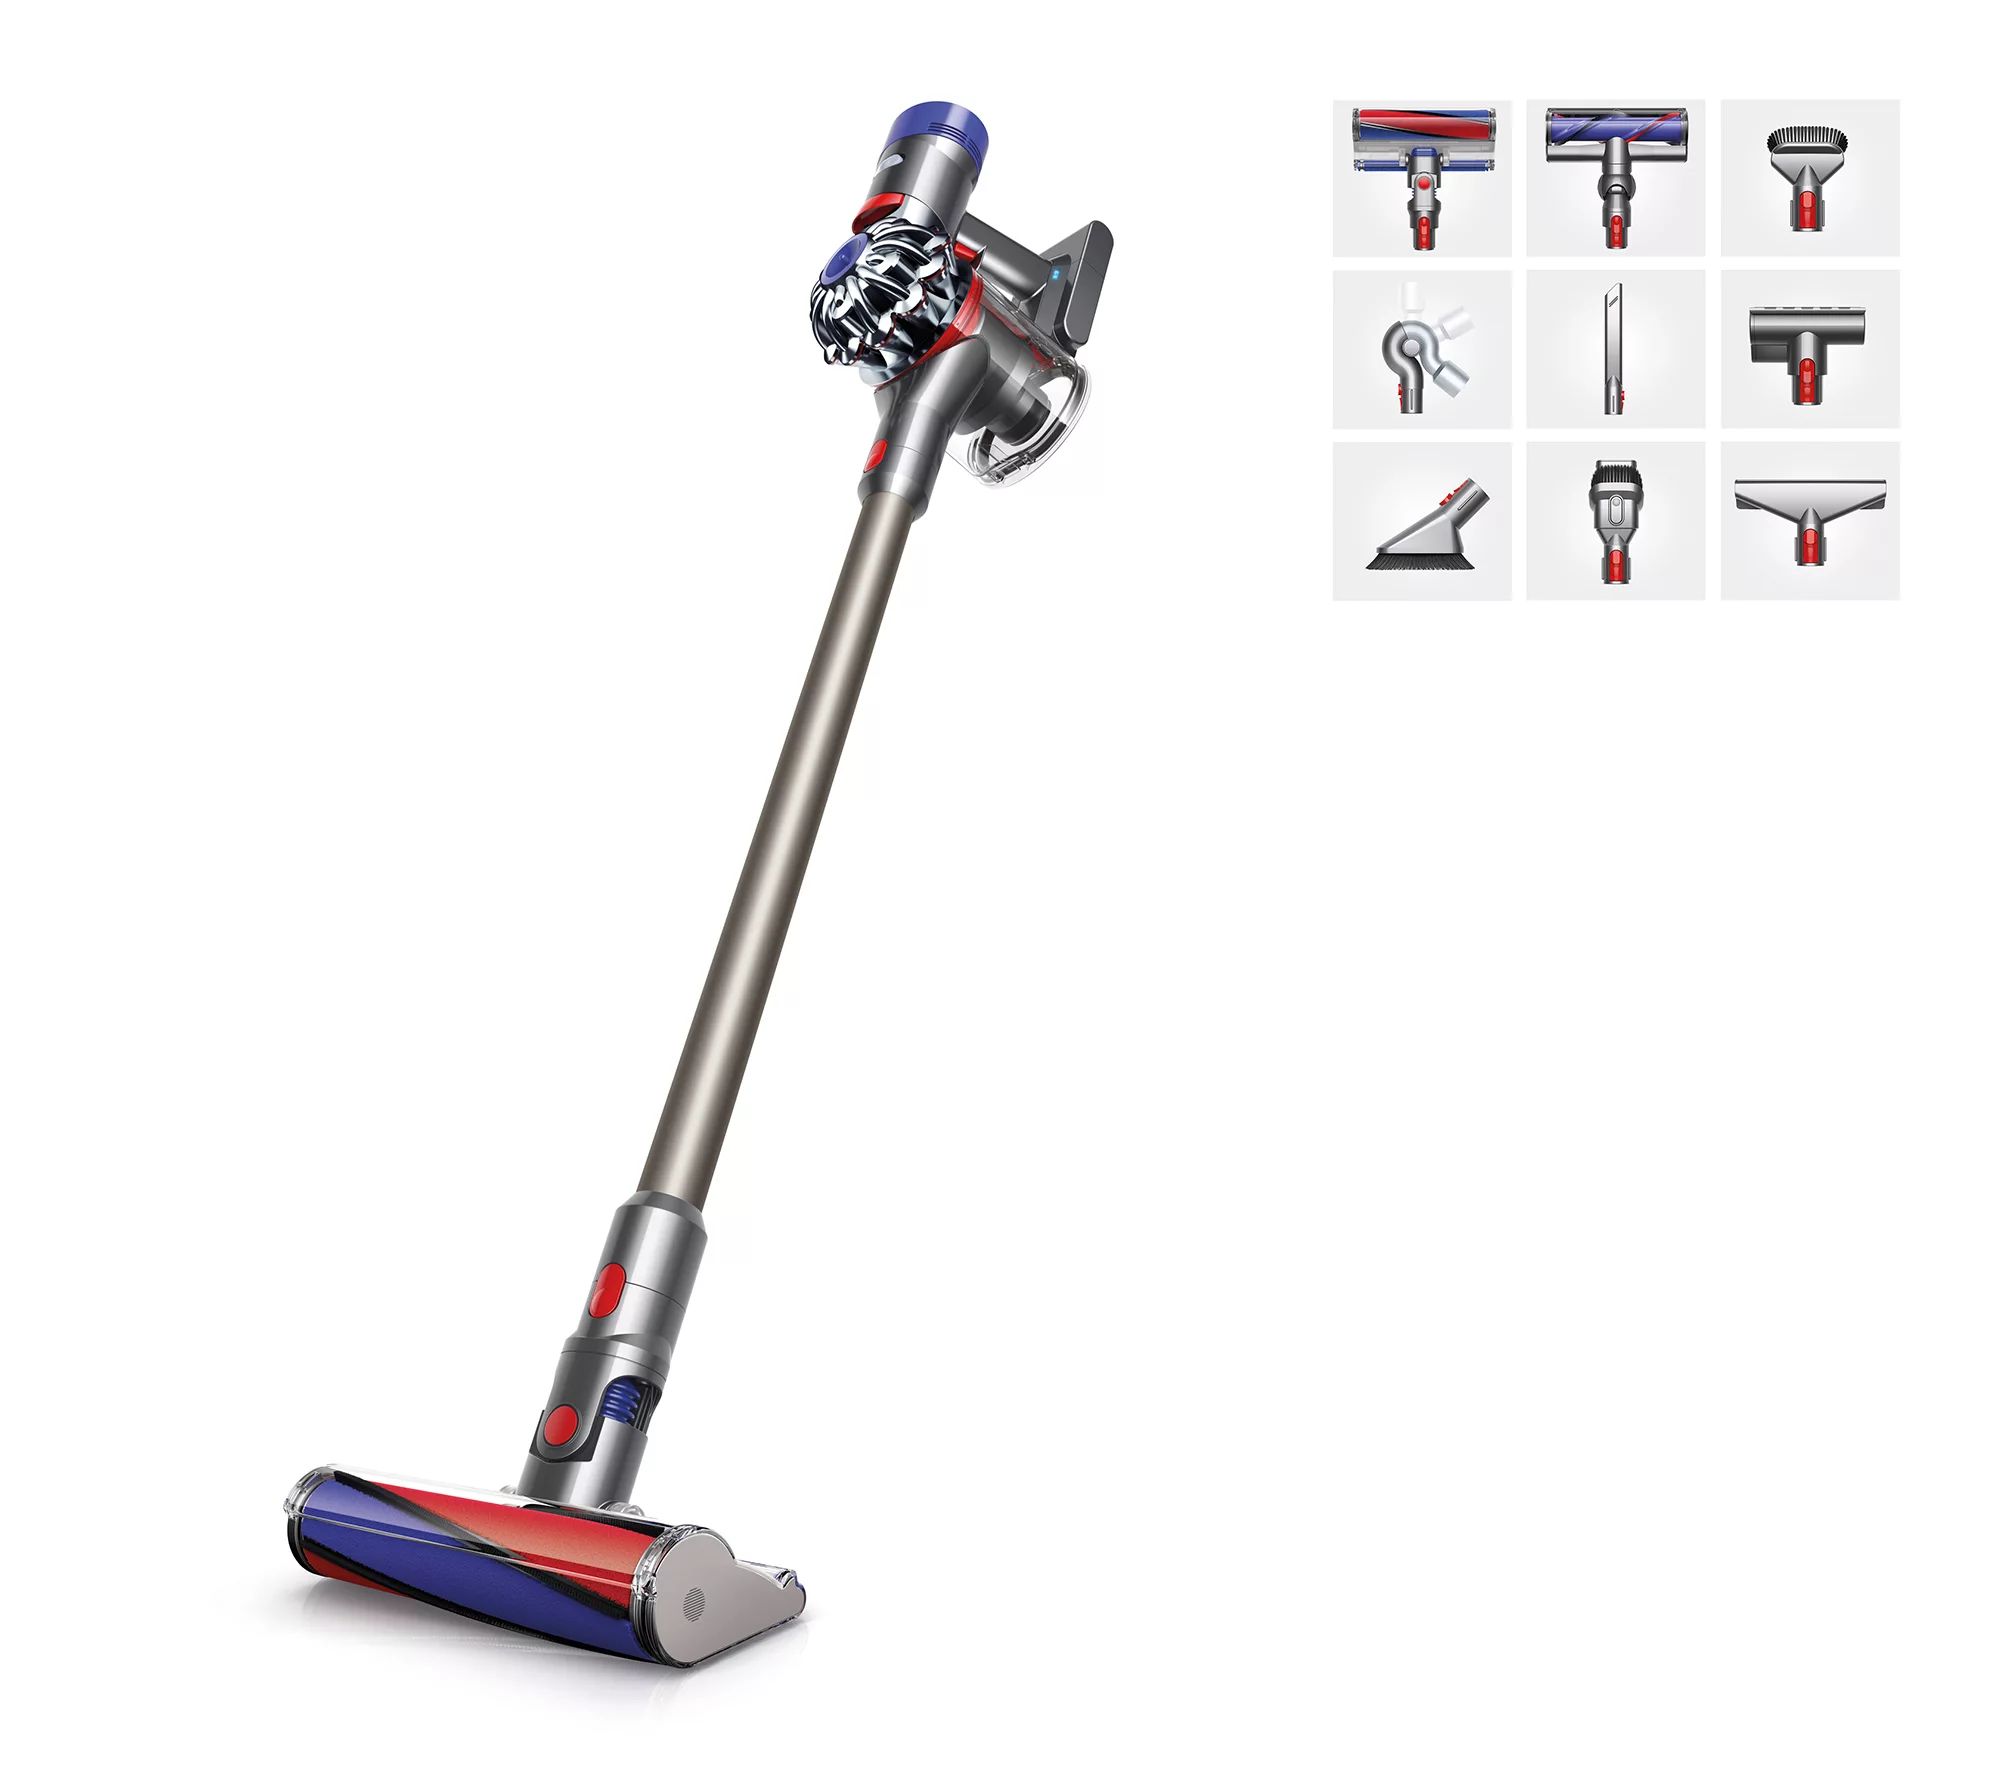 Dyson V8 Absolute Pro Cordless Vacuum with 8 Tool Attachments | QVC